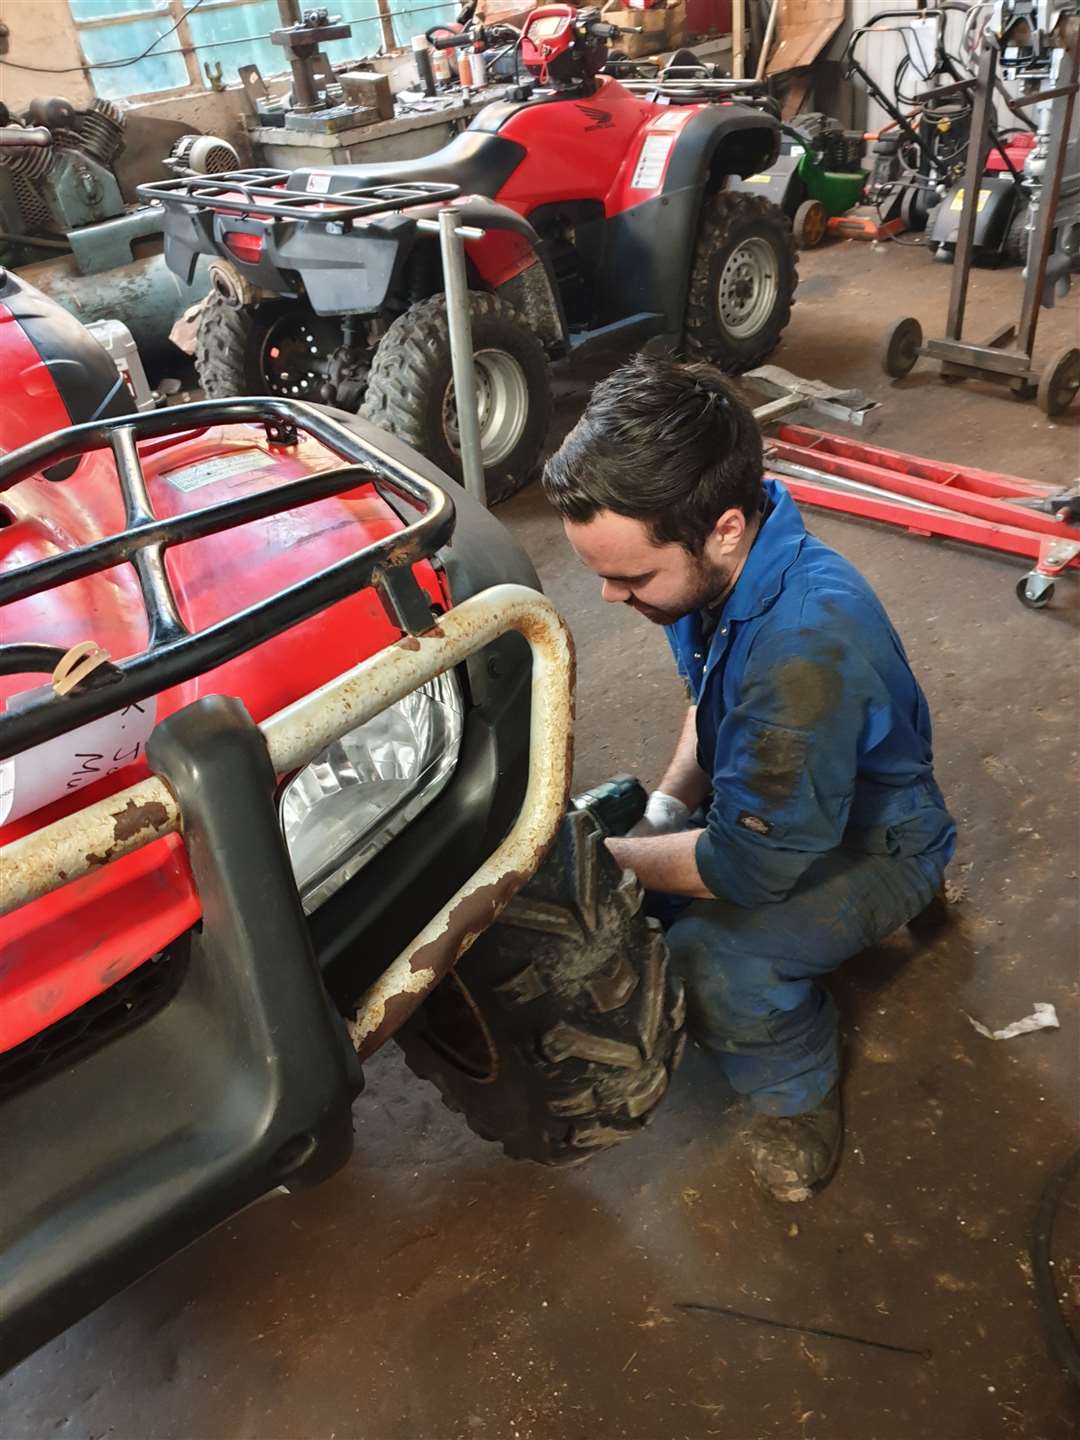 Award nominee Michael McLeod finds repairing agricultural machinery “really satisfying”.